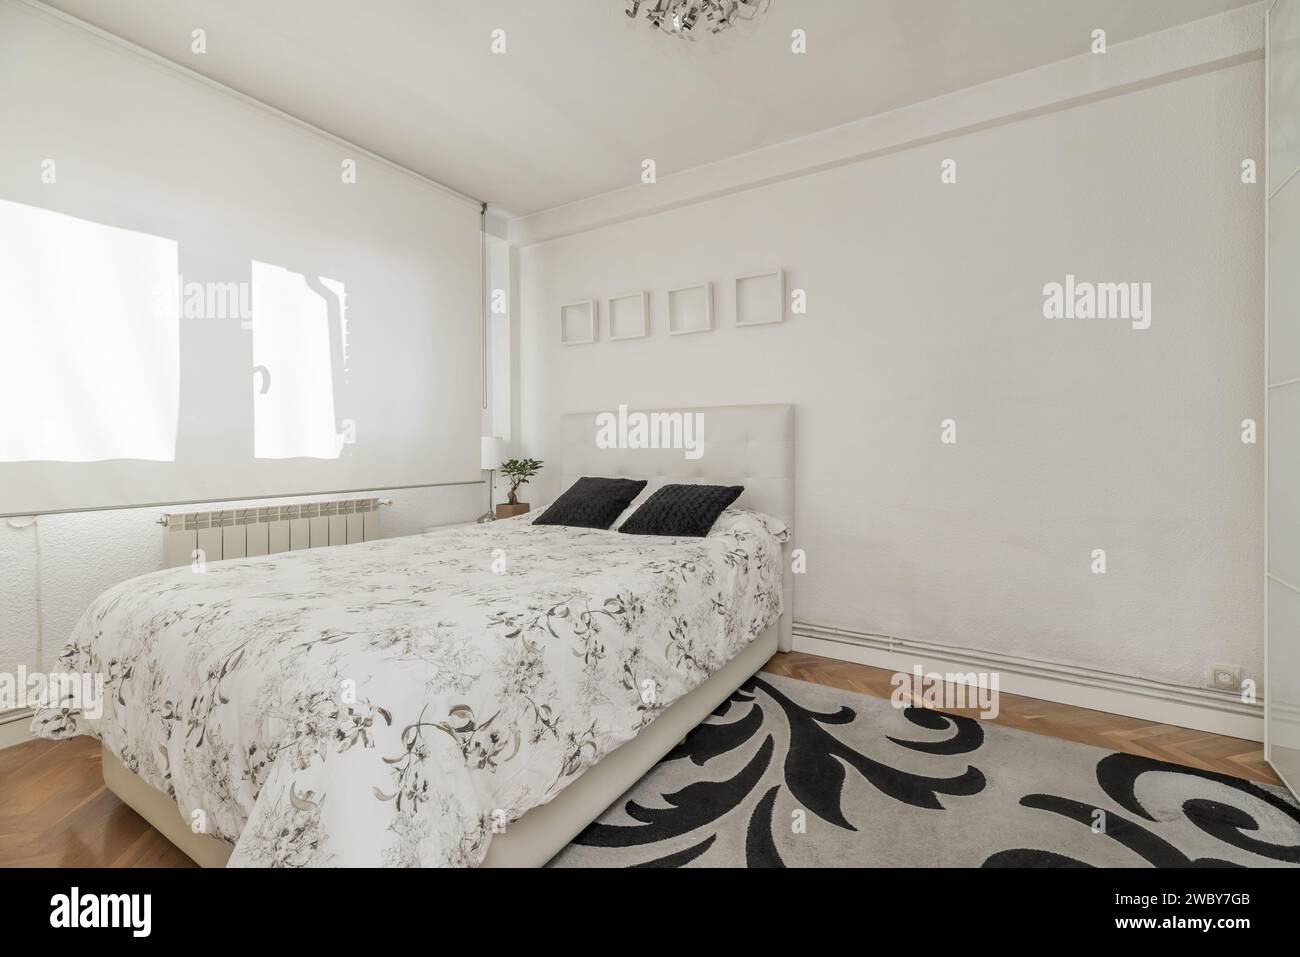 A bedroom with a double bed and a large white fabric blind covering the windows Stock Photo